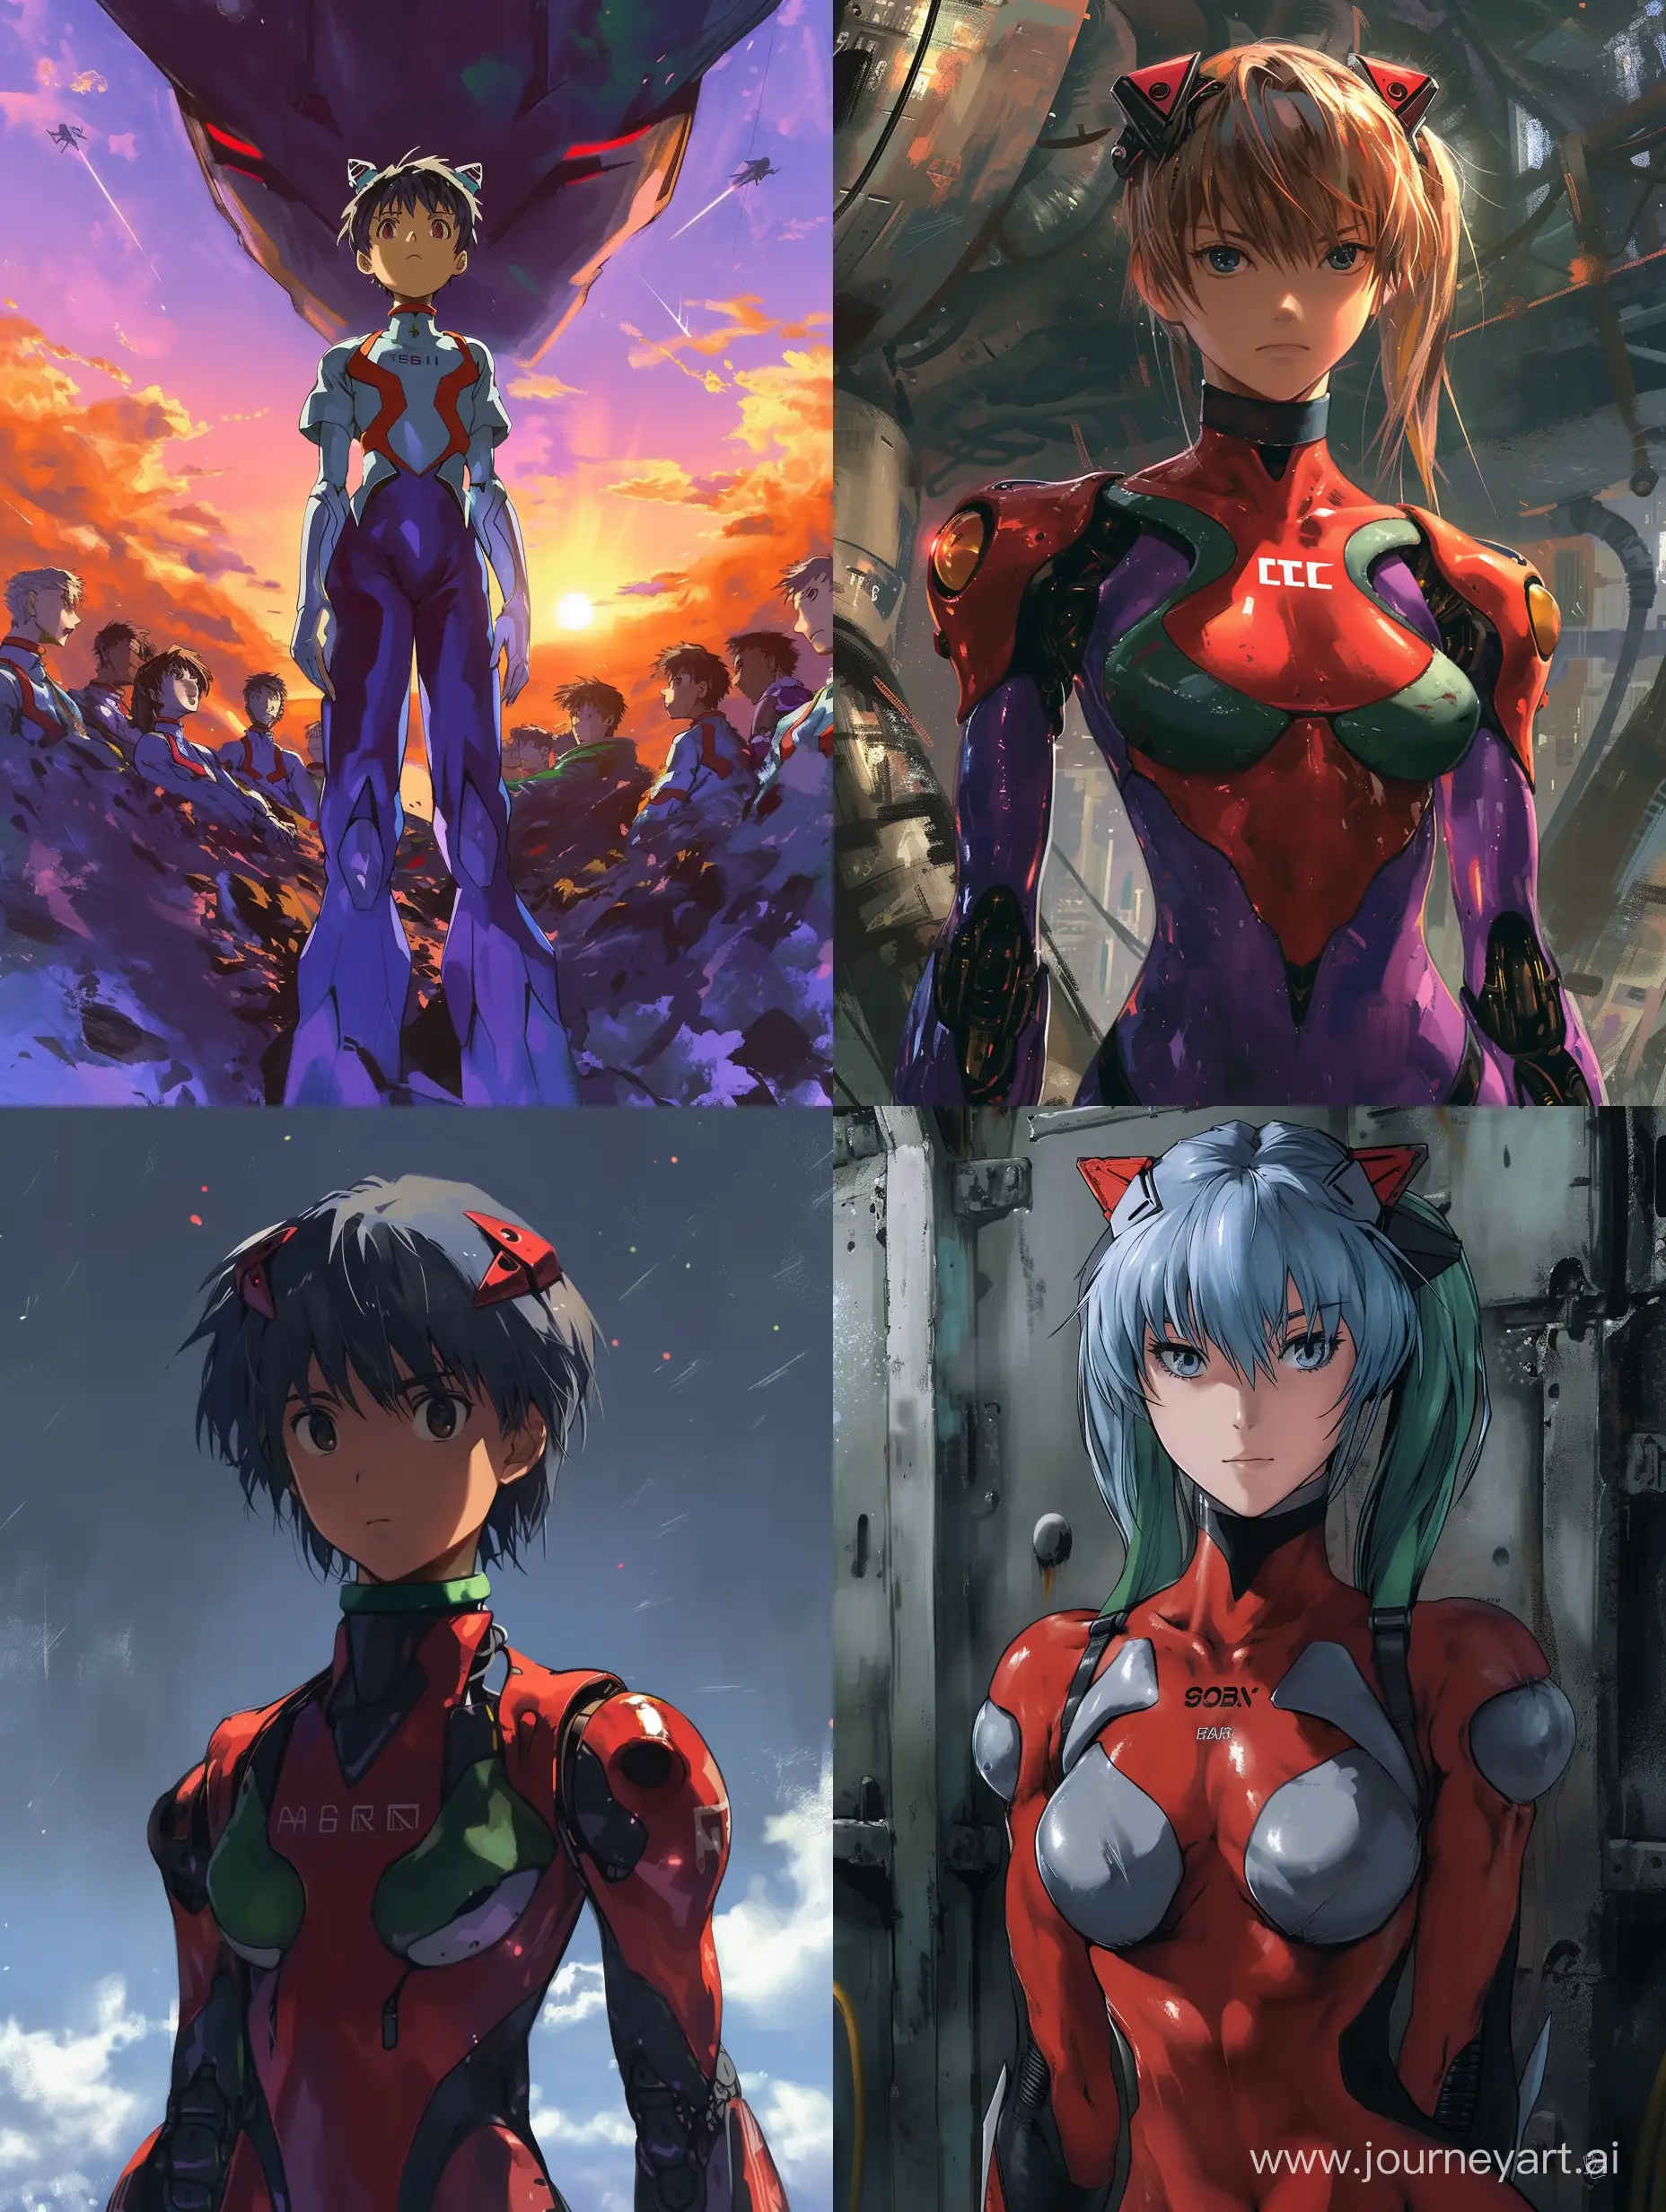 A picture of Neon Genesis Evangelion inspired by Studio Ghibli Art Style